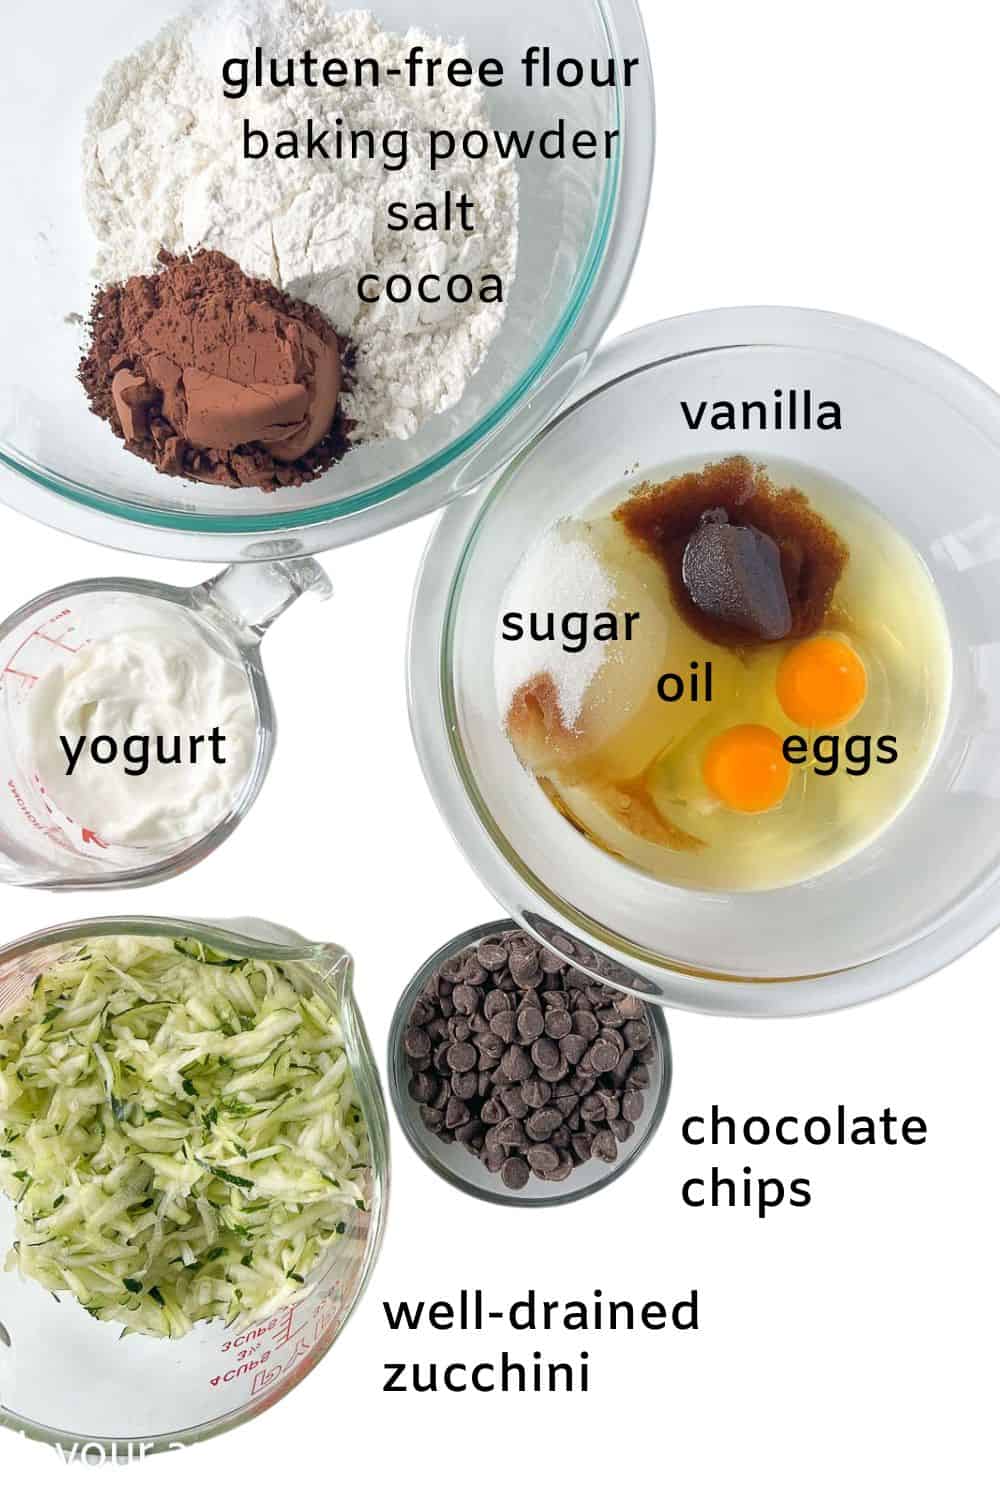 Ingredients for gluten-free double chocolate zucchini muffins.